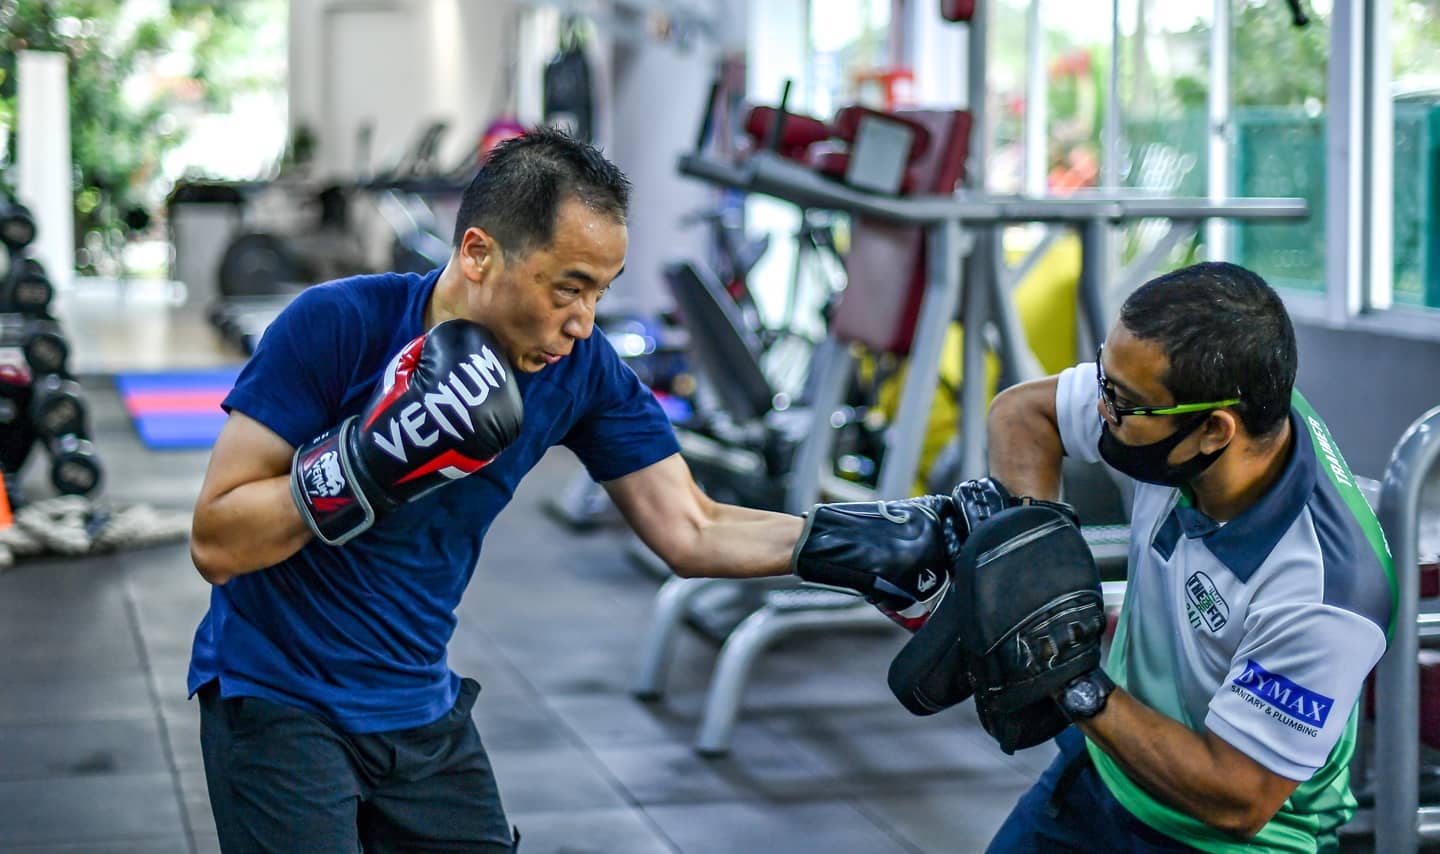 24 hour gyms singapore - the right fit muay thai